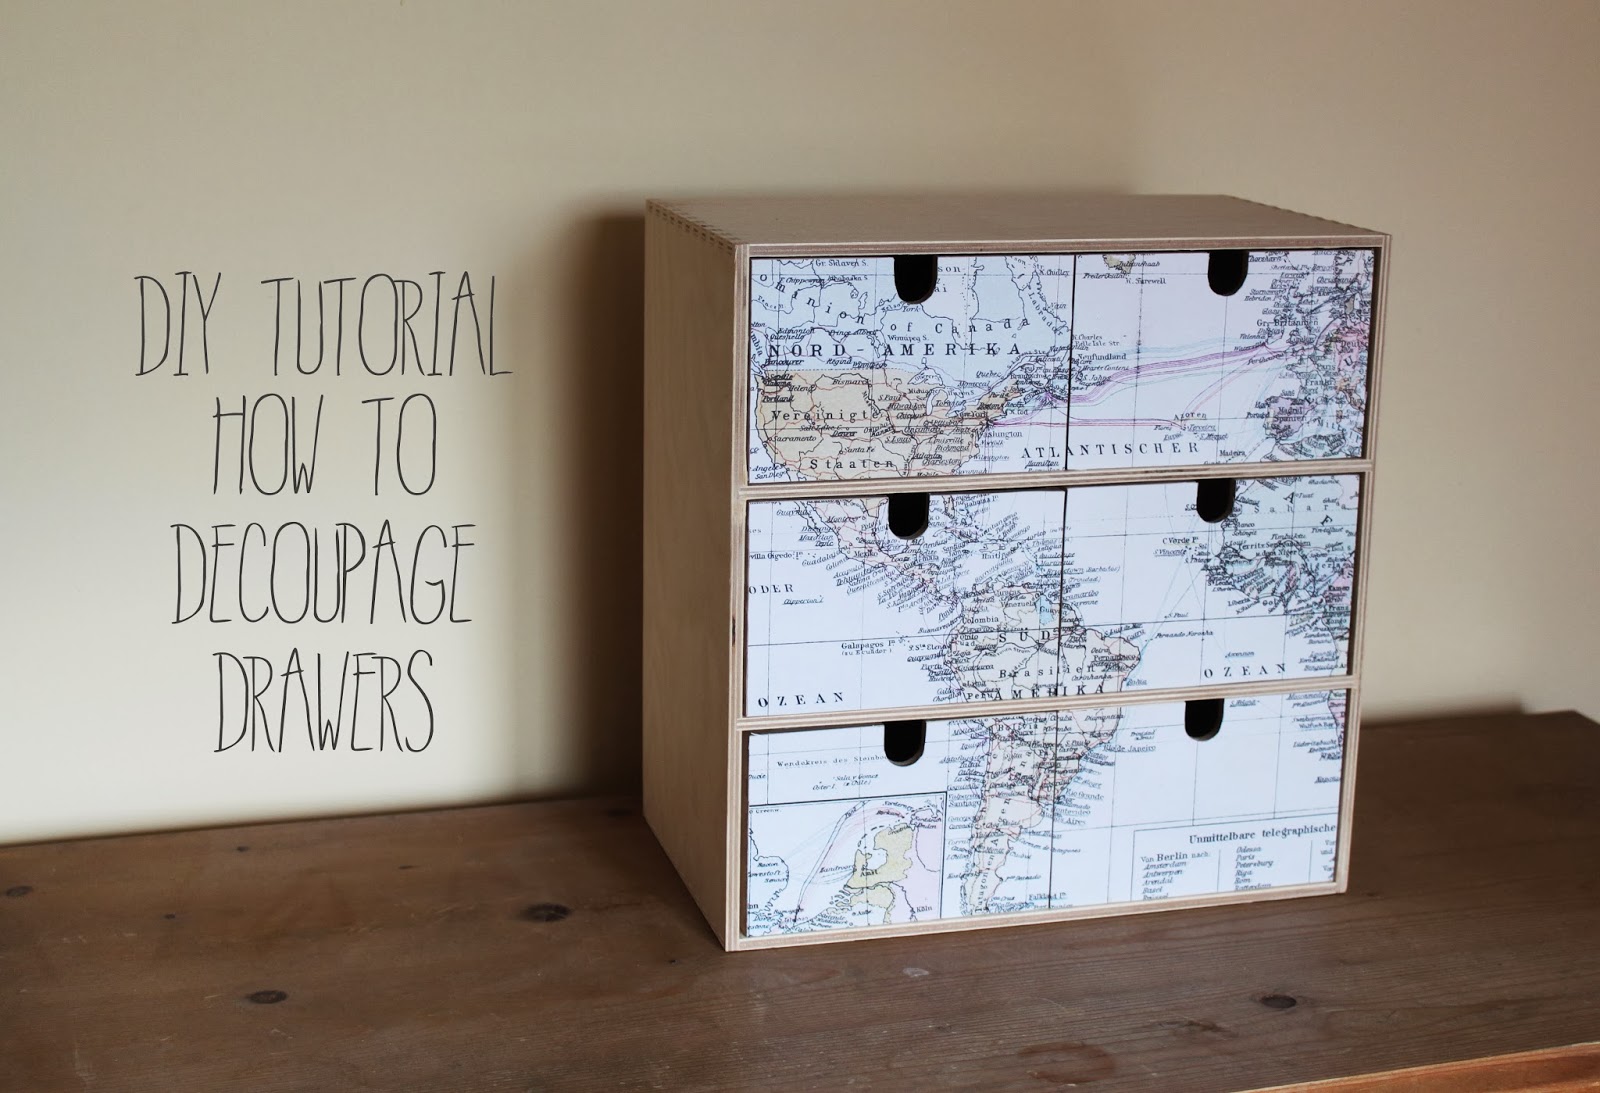 DIY Tutorial How To Decoupage Drawers Or Other Wooden Furniture